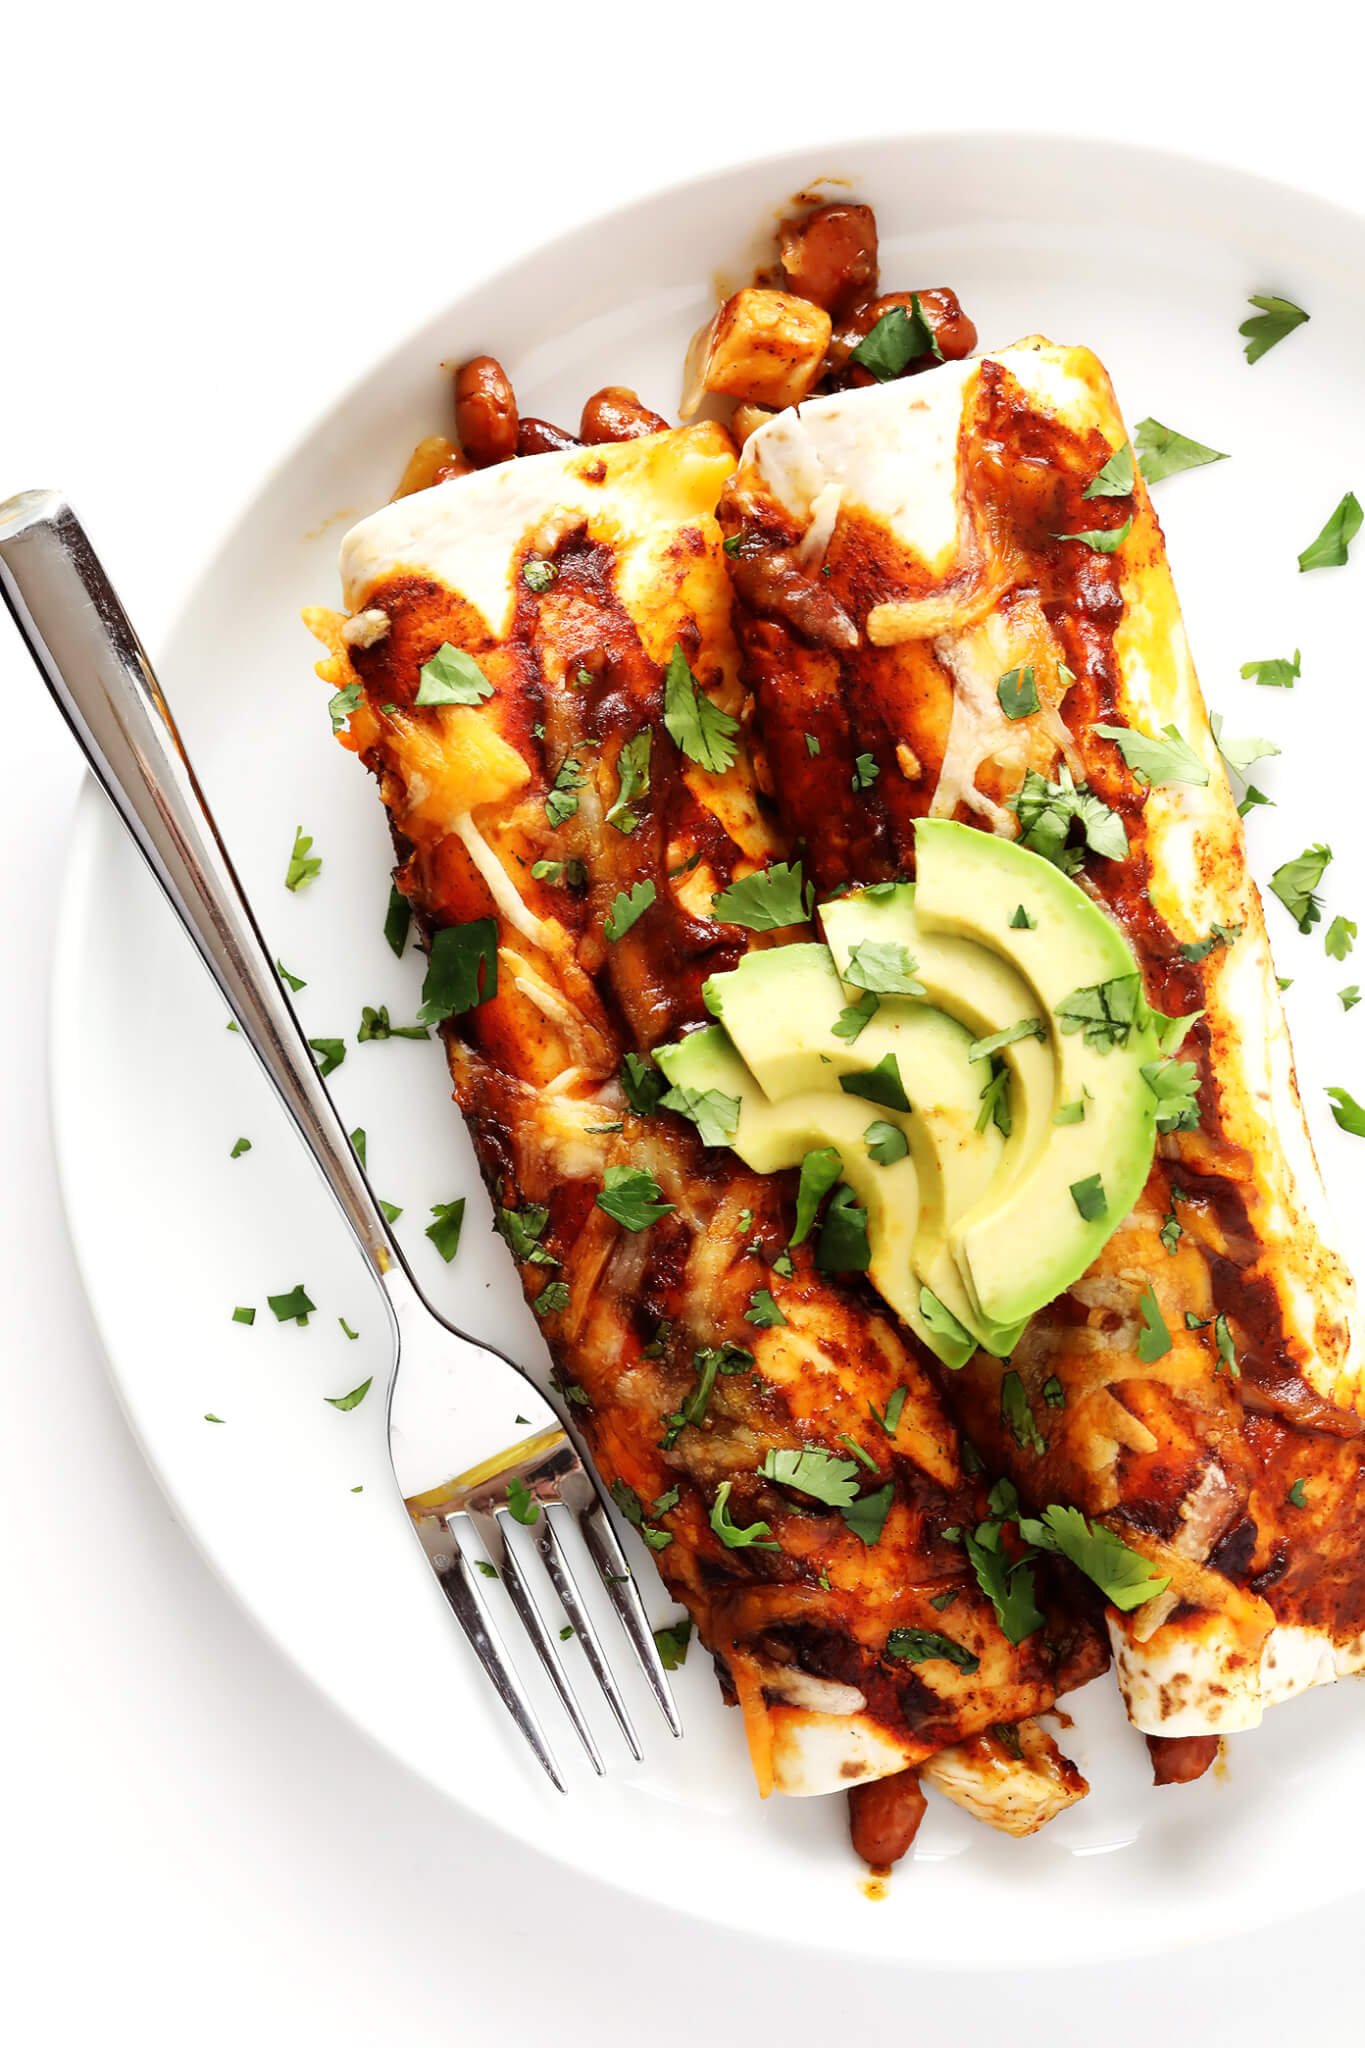 This Ancho Chicken Enchiladas recipe is easy to make, full of big flavor, nice and cheesy and filled with chicken and beans, and perfect for Cinco de Mayo or anytime you're feeling like Mexican food! | gimmesomeoven.com